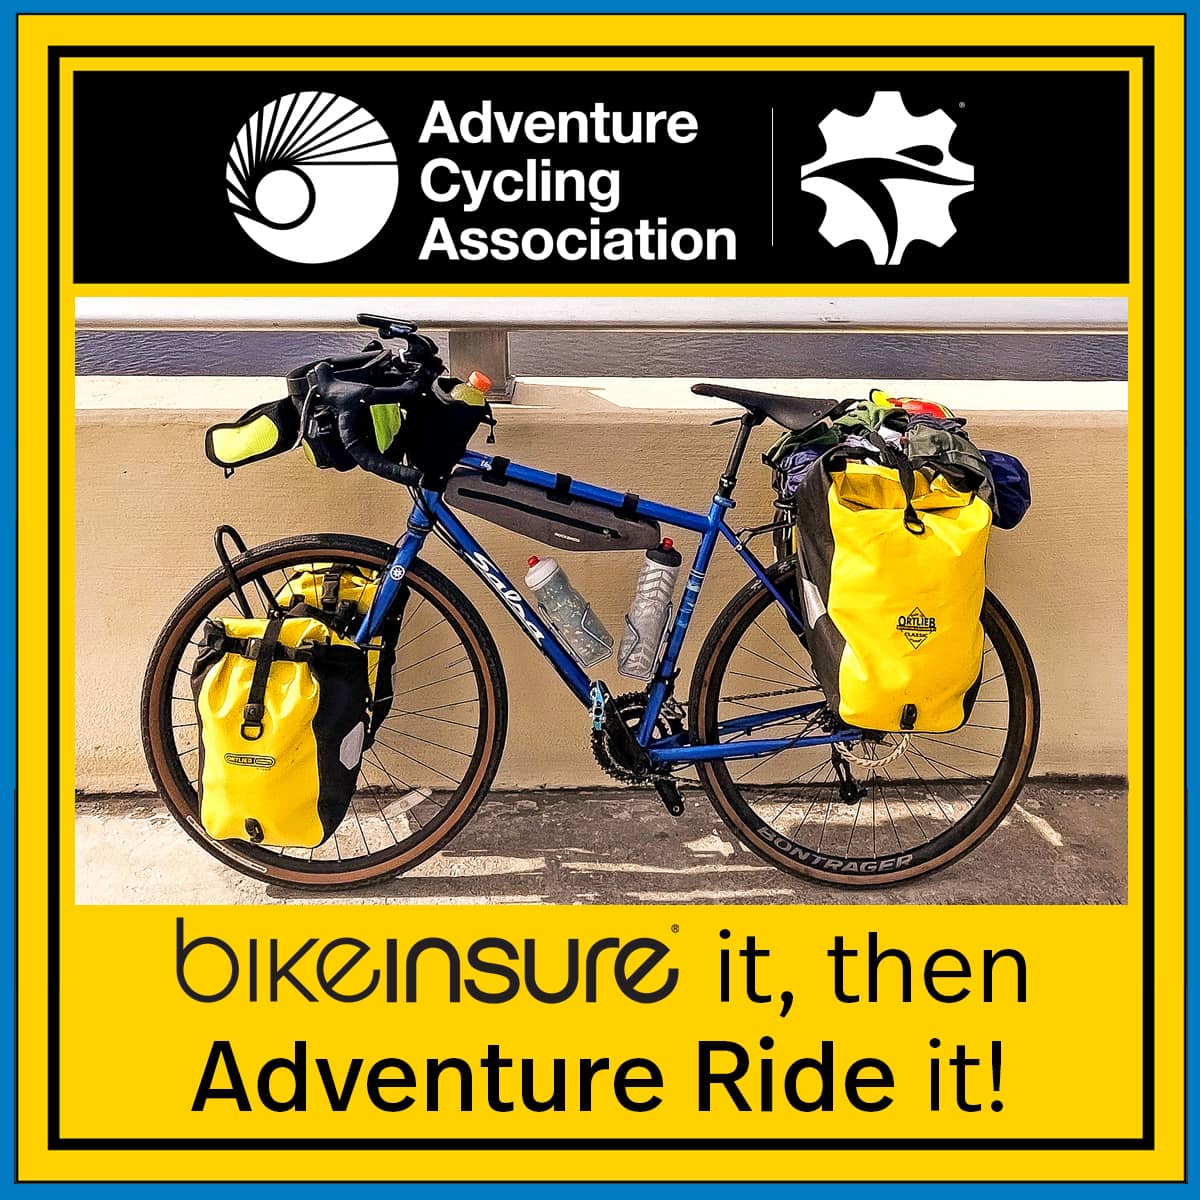 Picture of loaded bike with slogan "BikeInsure it, then Adventure Ride it!"